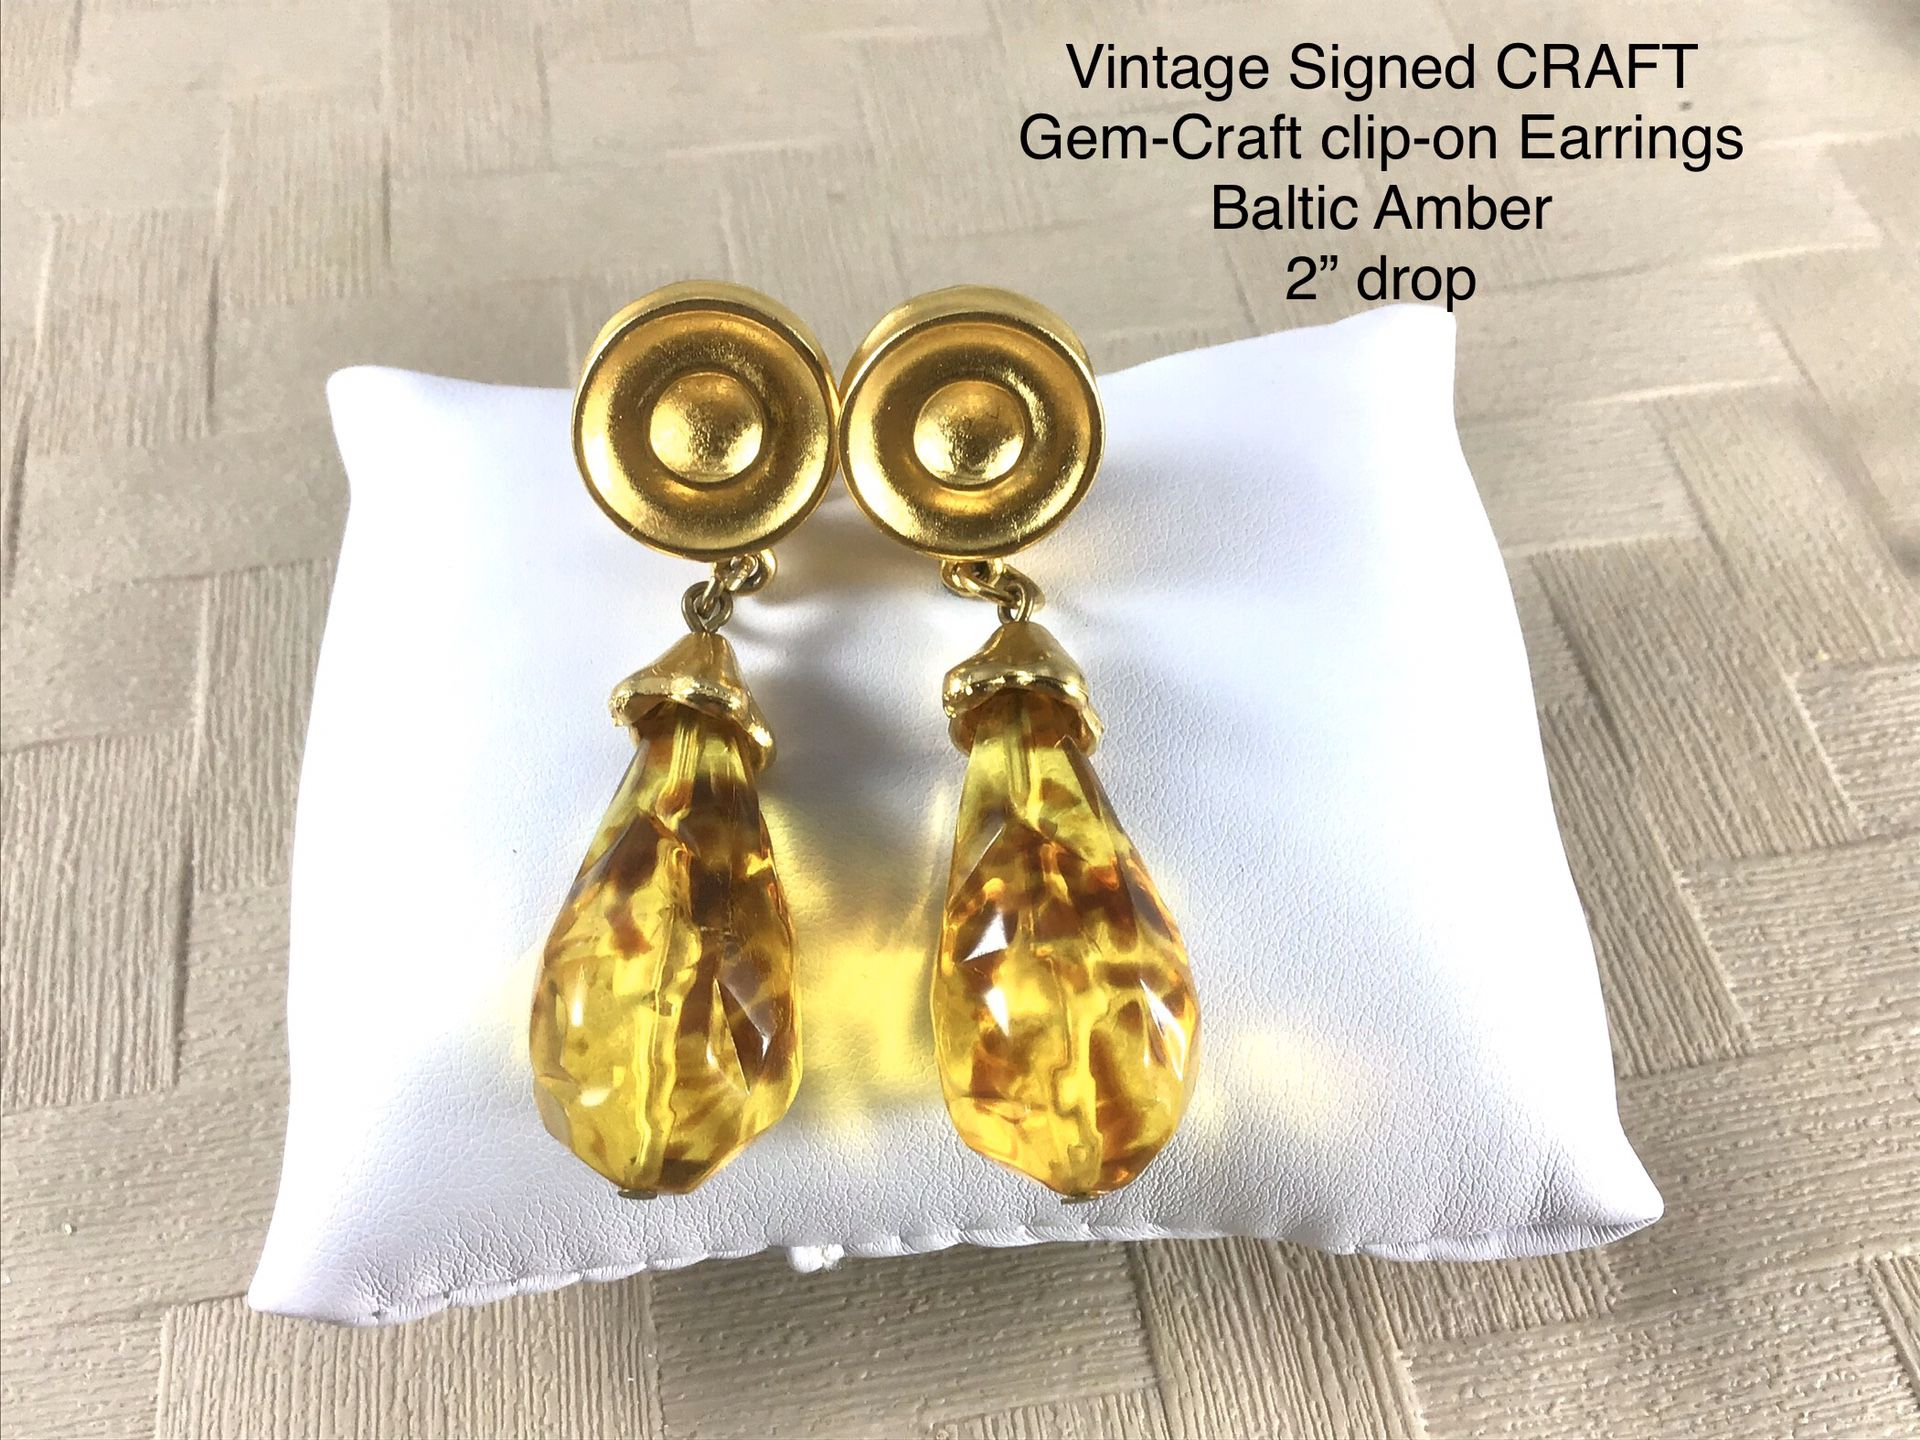 Vintage Signed CRAFT Gem-Craft clip-on Earrings Baltic Amber, 2” drop, excellent condition, Great Gift! 🎁